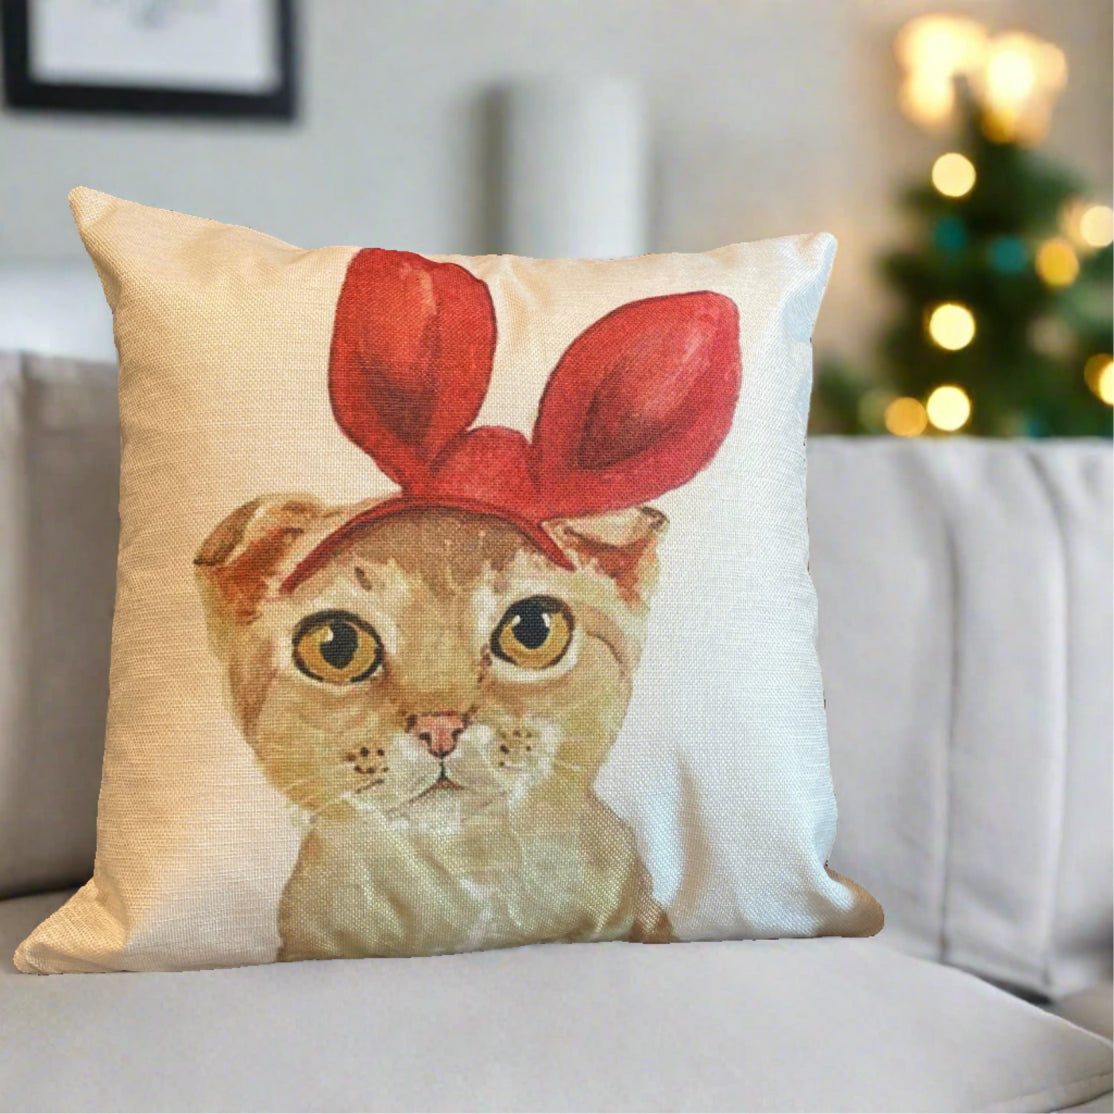 Lovely Orange Tabby Cat With Red Bunny Ear Pillow Cover